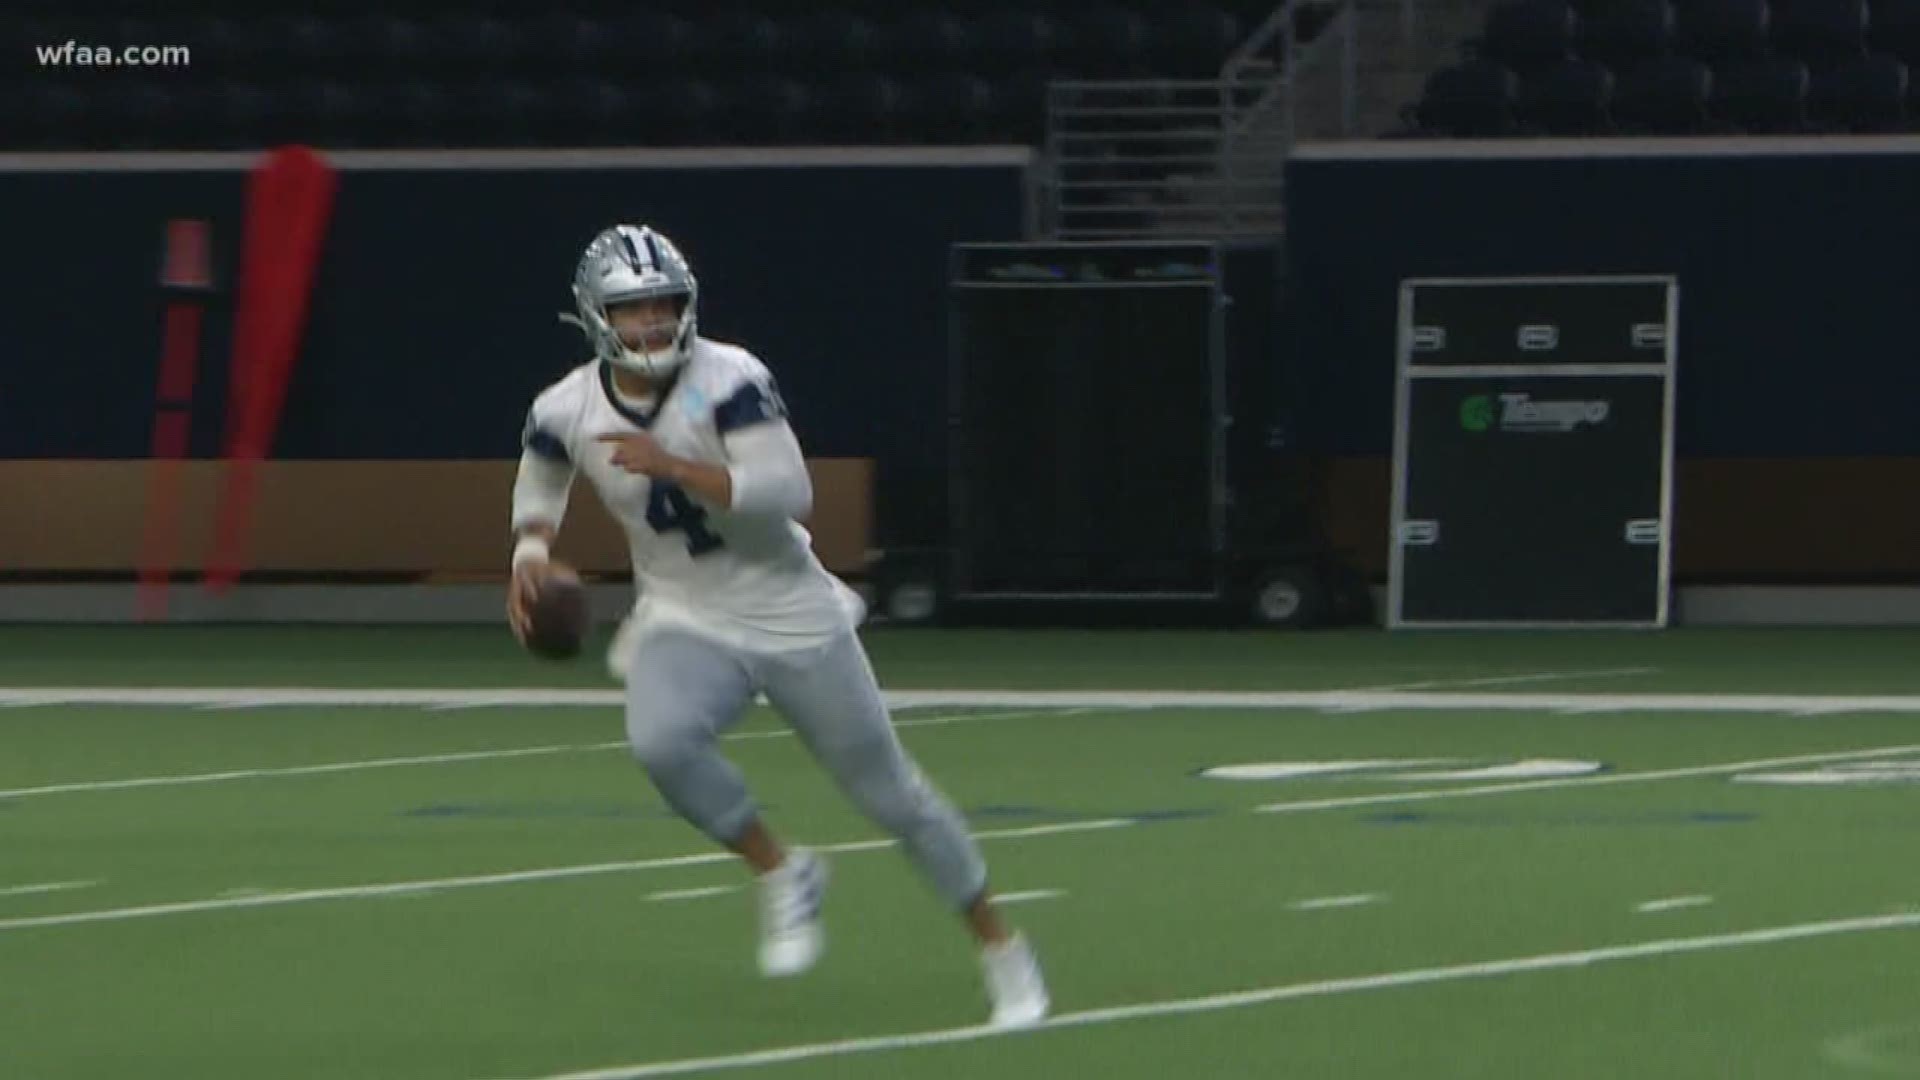 Quarterback Dak Prescott sports Cowboy hat after the team ends minicamp but says he still doesn't have a contract. "It happens when it happens," the QB said. Tight end Jason Witten says Prescott's improvement has been "off the charts."